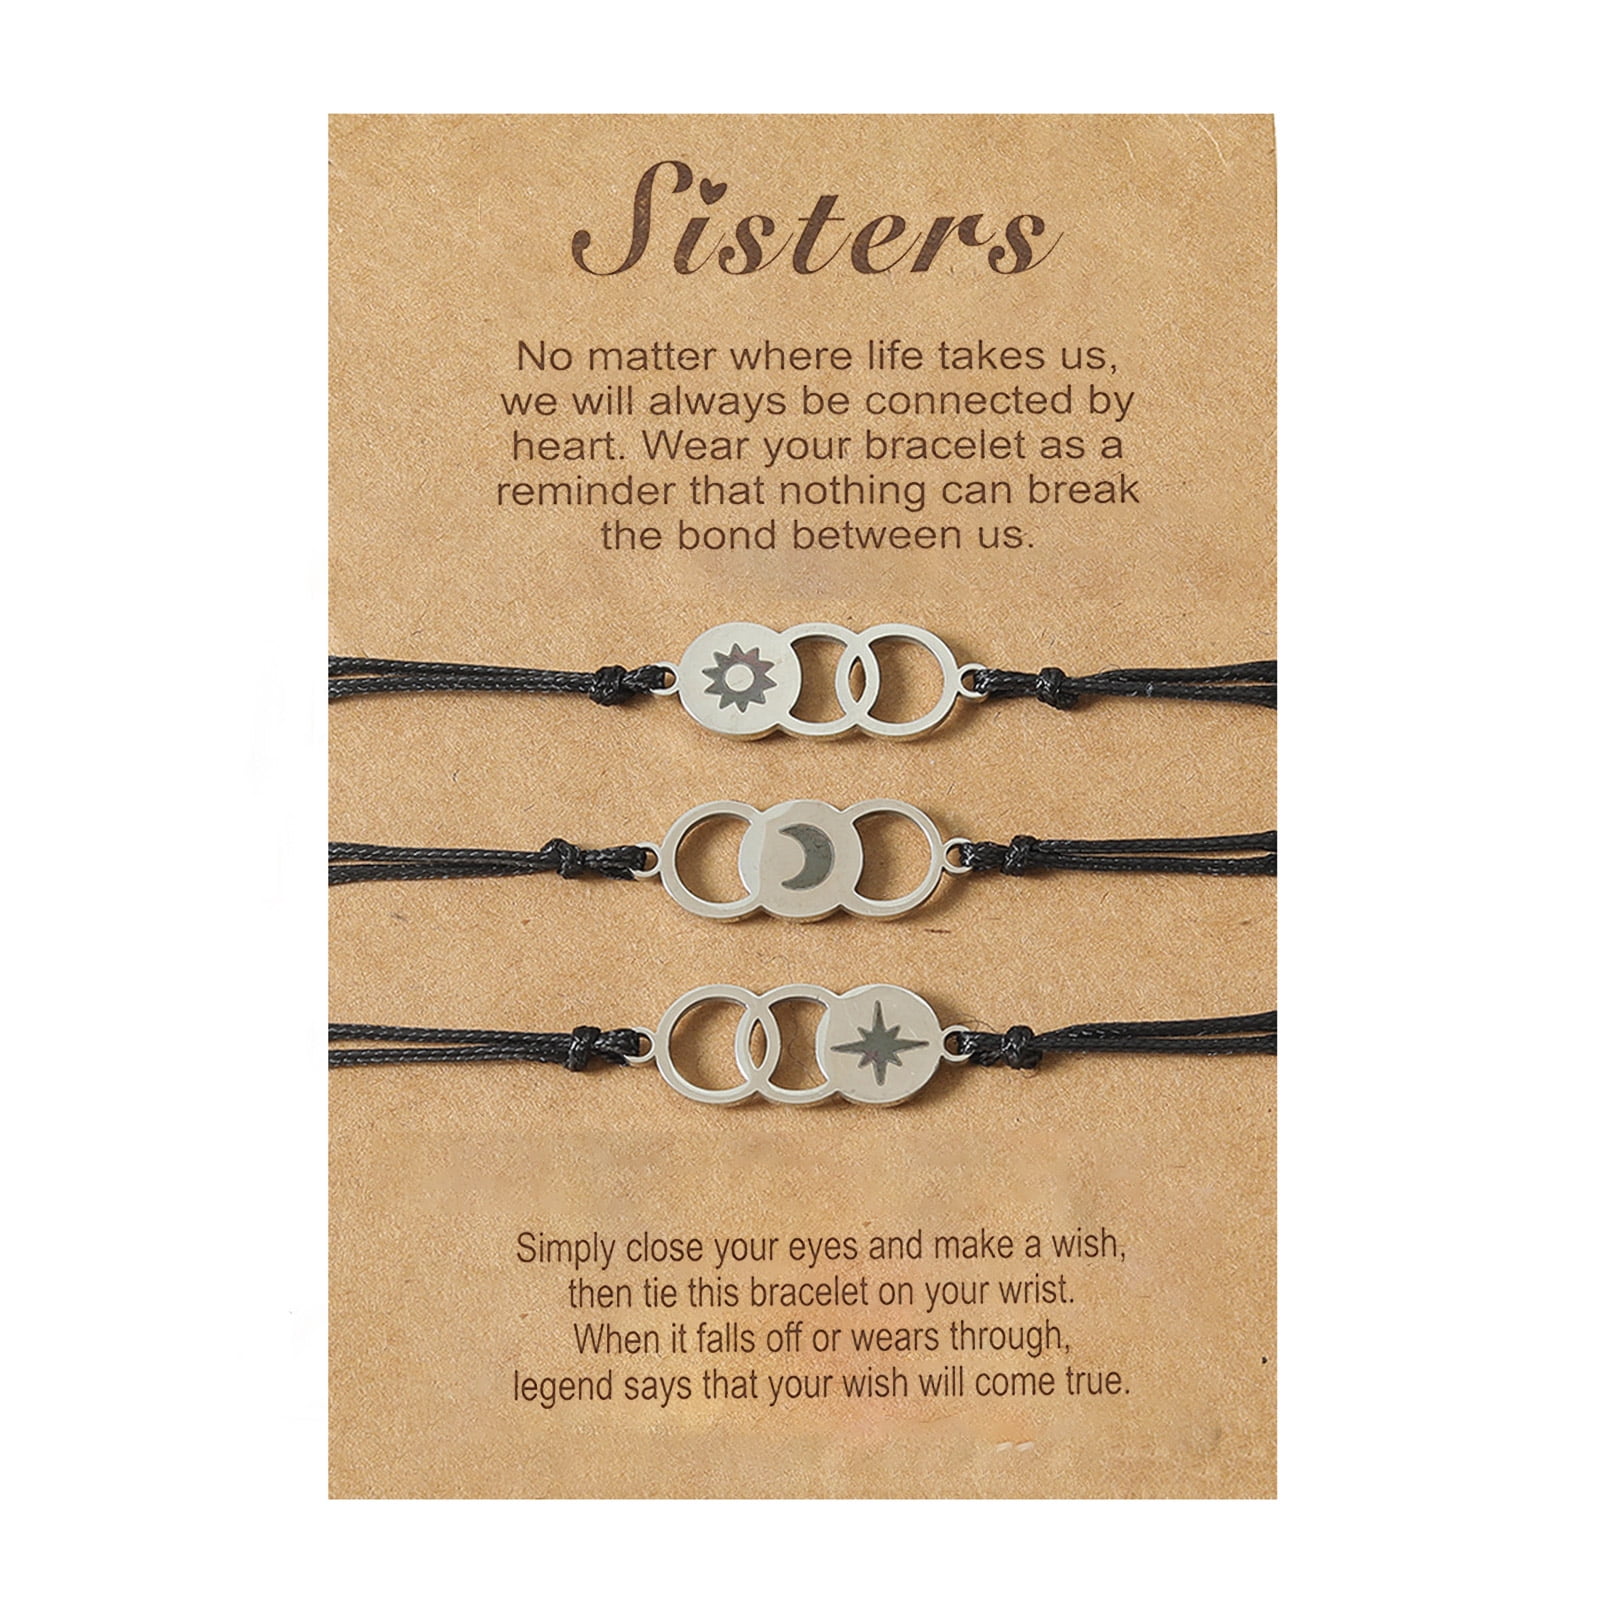 Sorrowso for Sun Moon Star Best Friend Necklaces for 3 Women Teens Girls Friendship Bracelet Set Sister Jewelry Gifts for Her Sil 827e34fa 4fae 4c0c acf6 d3e11f51a75e.0d2175fdc1d5057dfda0673b7f3d65e9